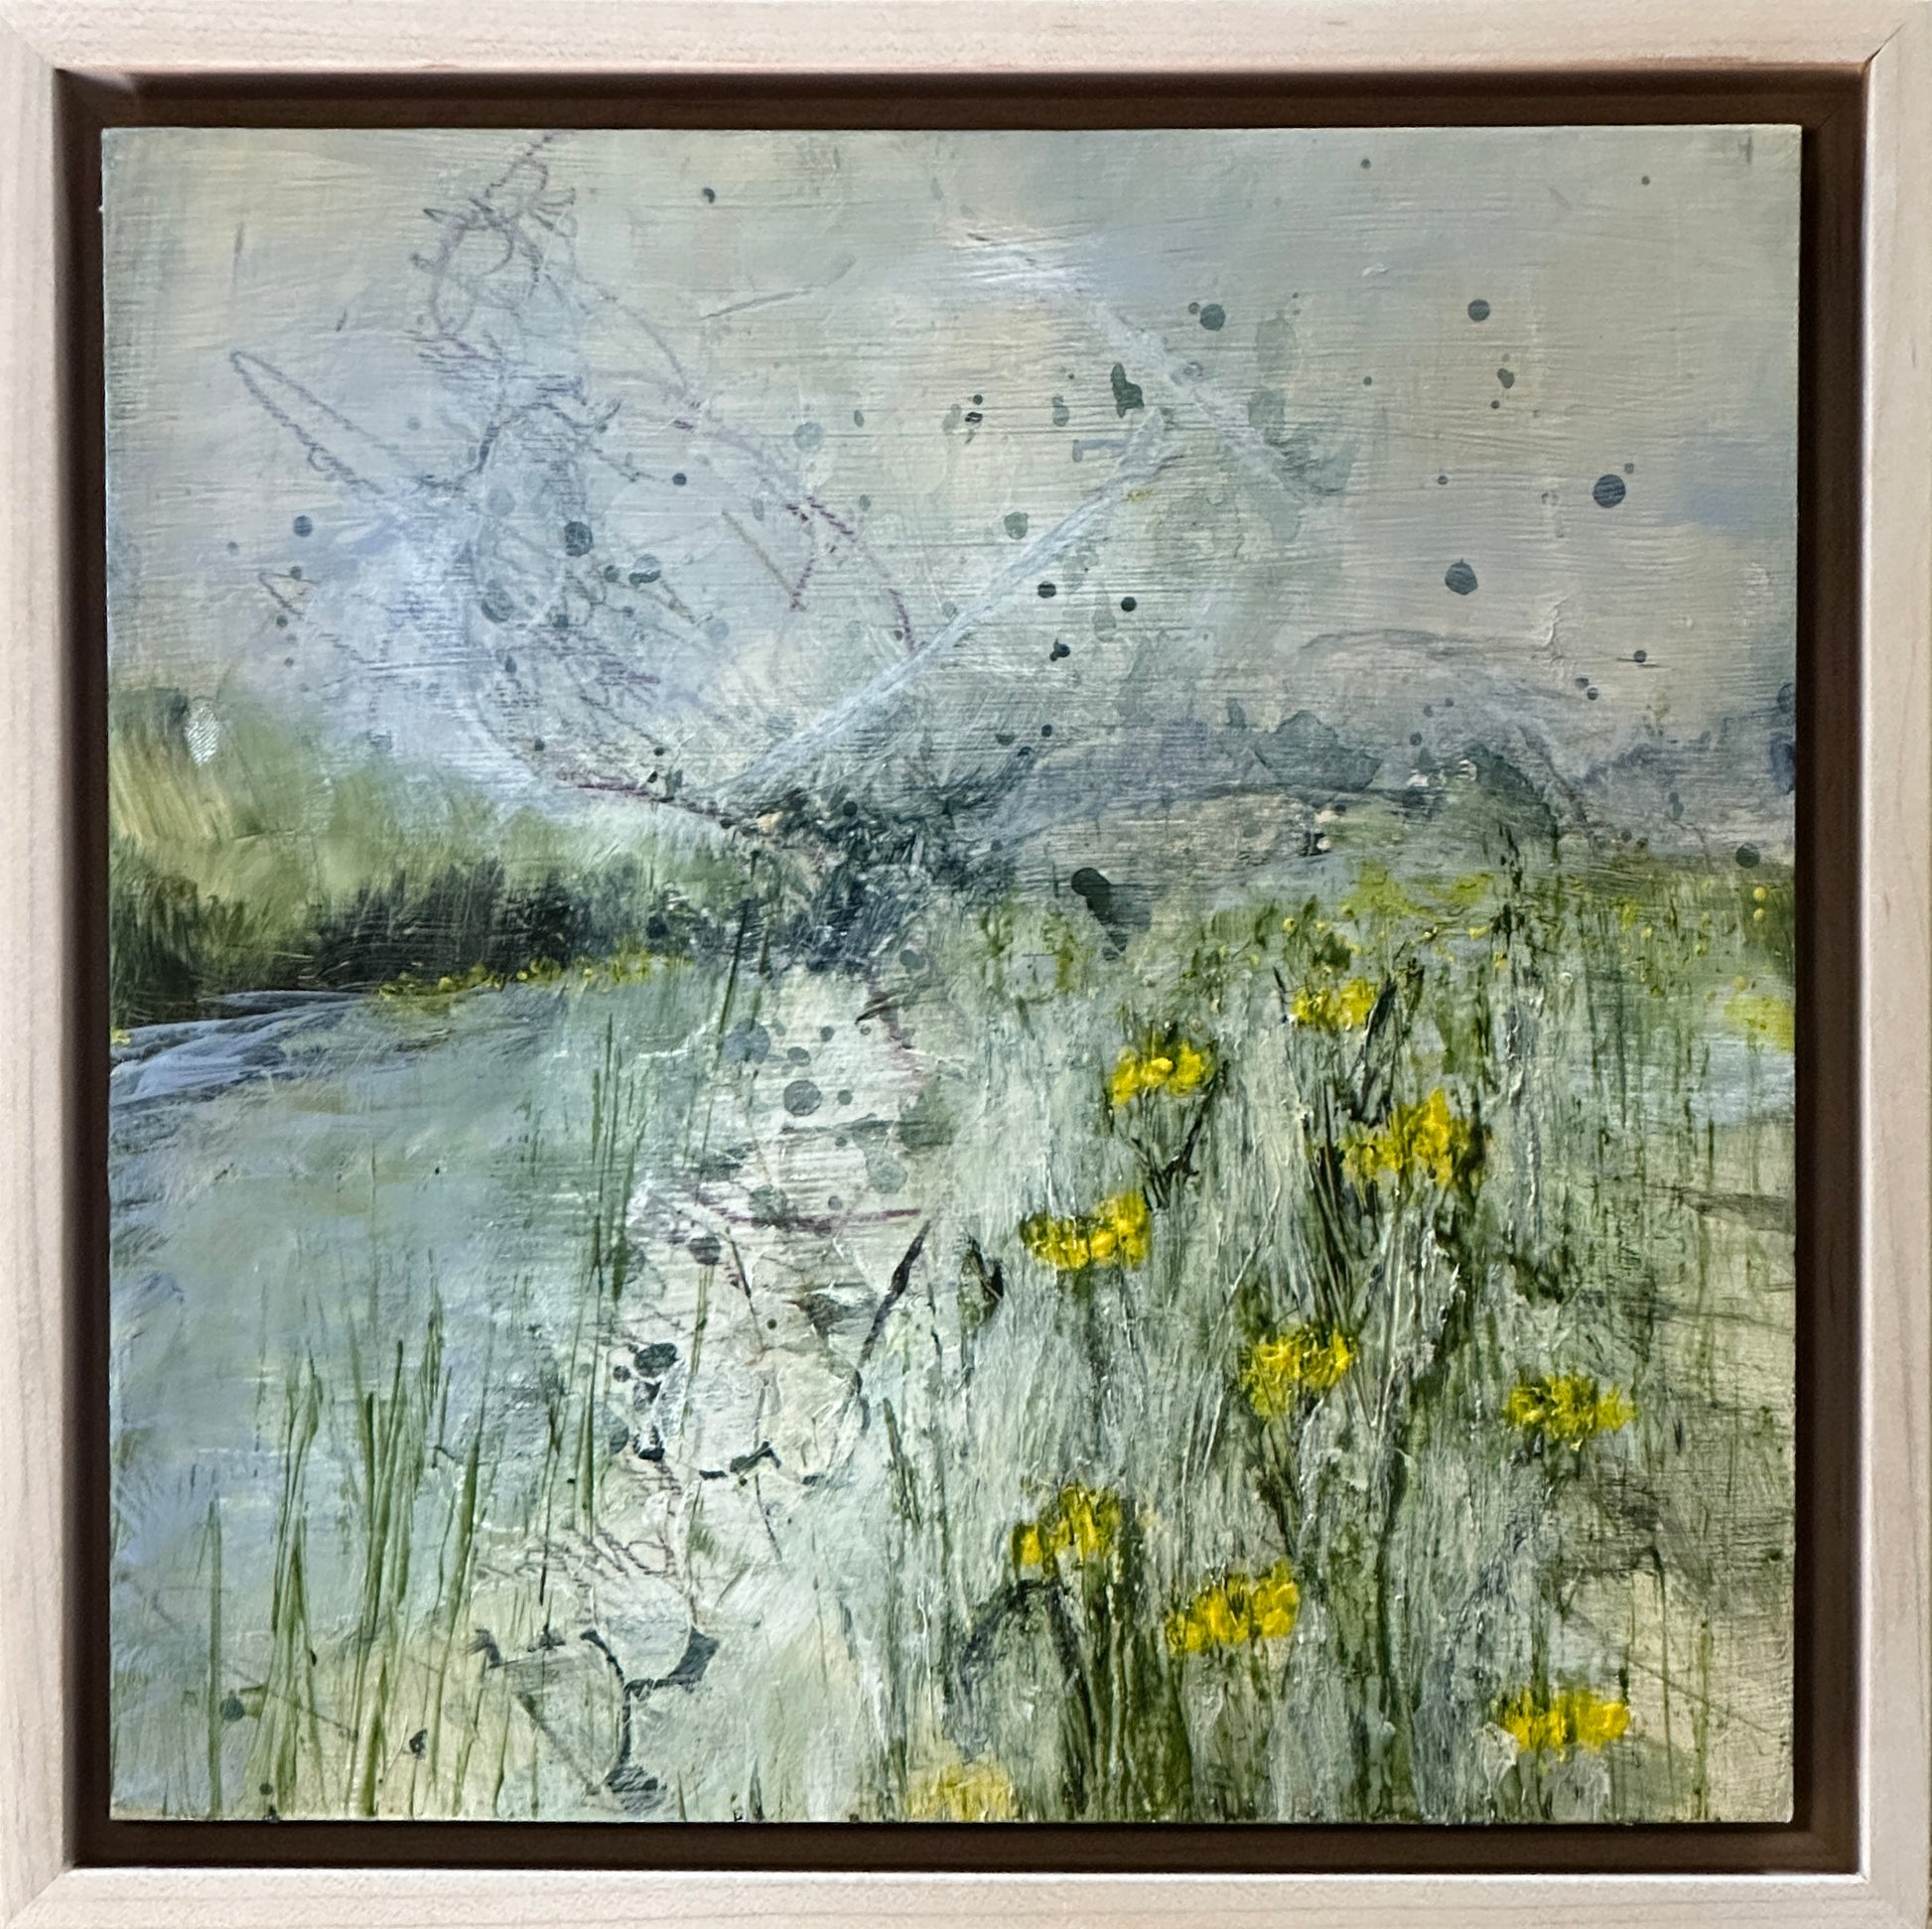 8 x 8 x 1.5-inch, framed, impresssion of daffodils by a river.  Acrylic painting on cradled panel with natural wood frame. Part of our 2022 collection.  Collect them all!